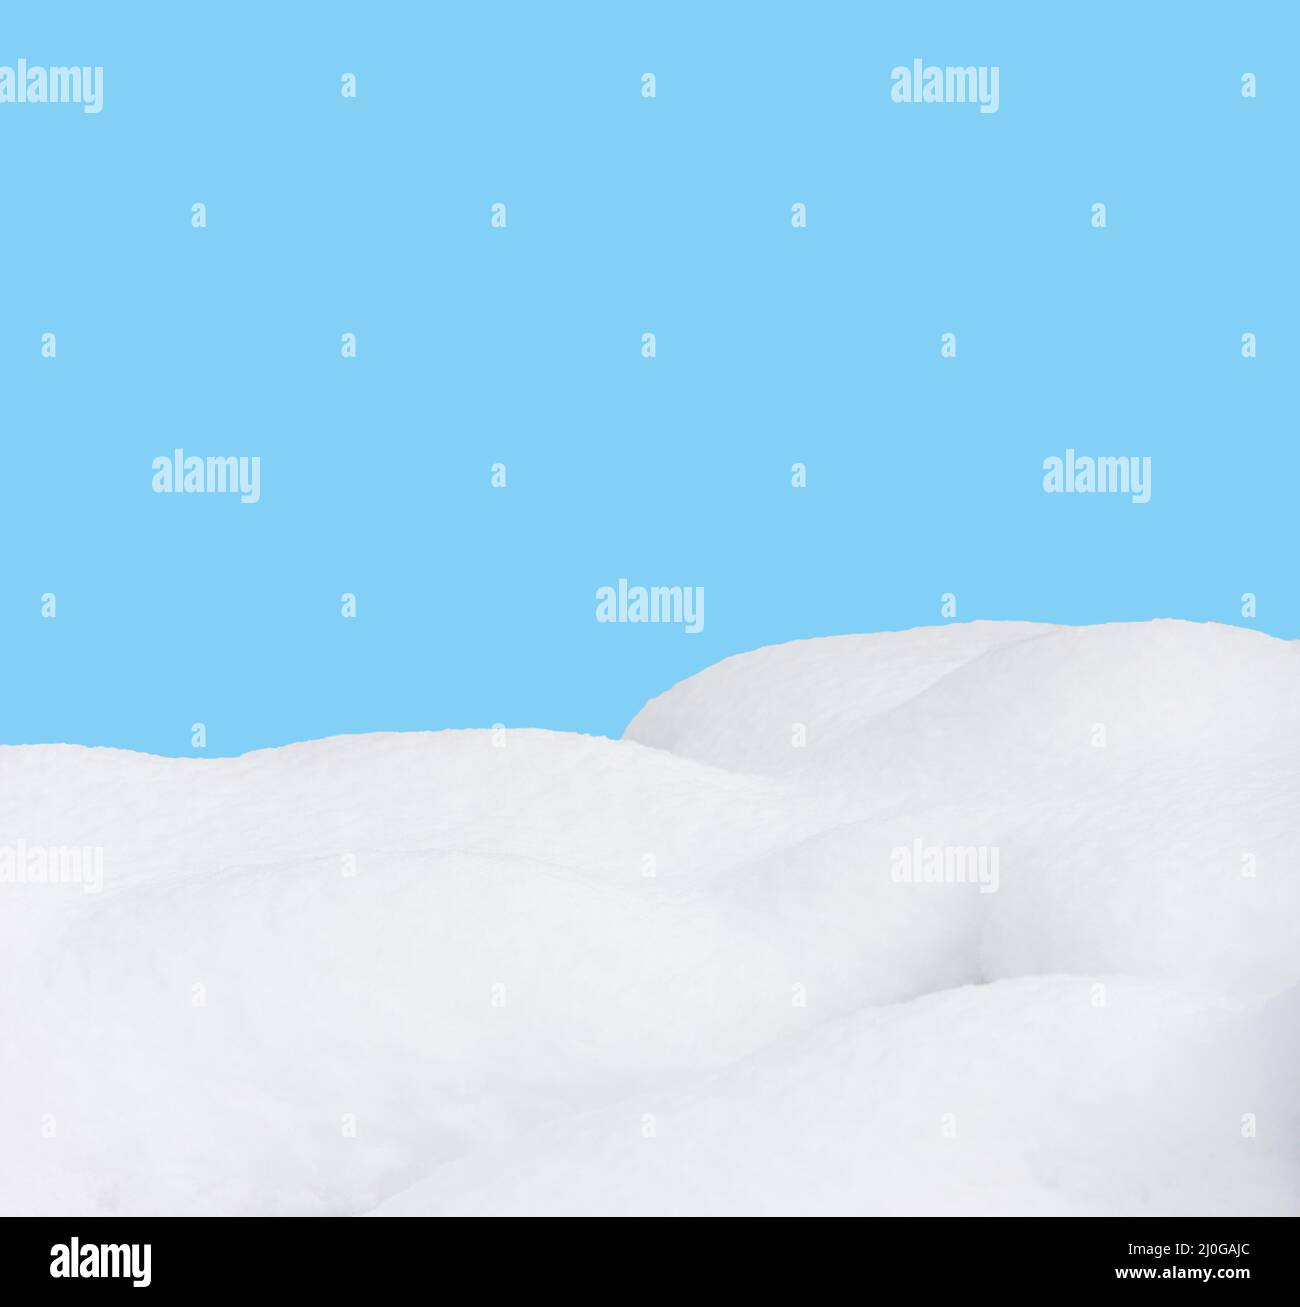 Snow drifts isolated on bue background Stock Photo